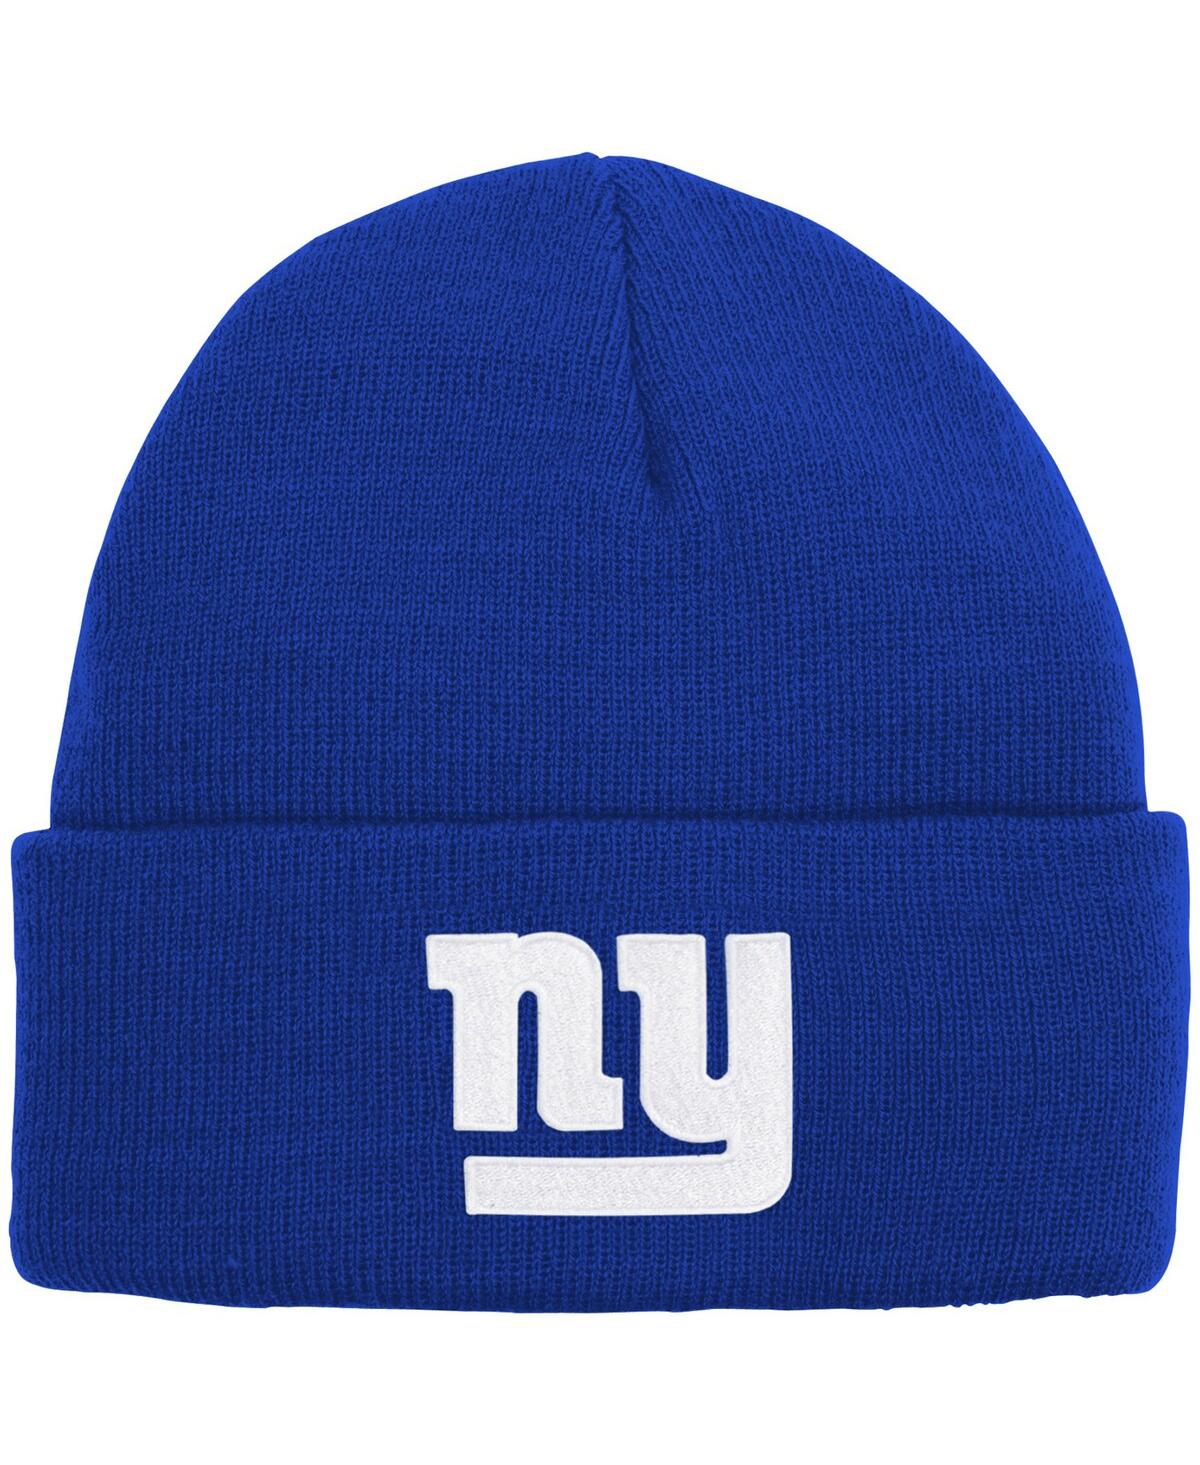 Shop Outerstuff Big Boys And Girls Royal New York Giants Basic Cuffed Knit Hat